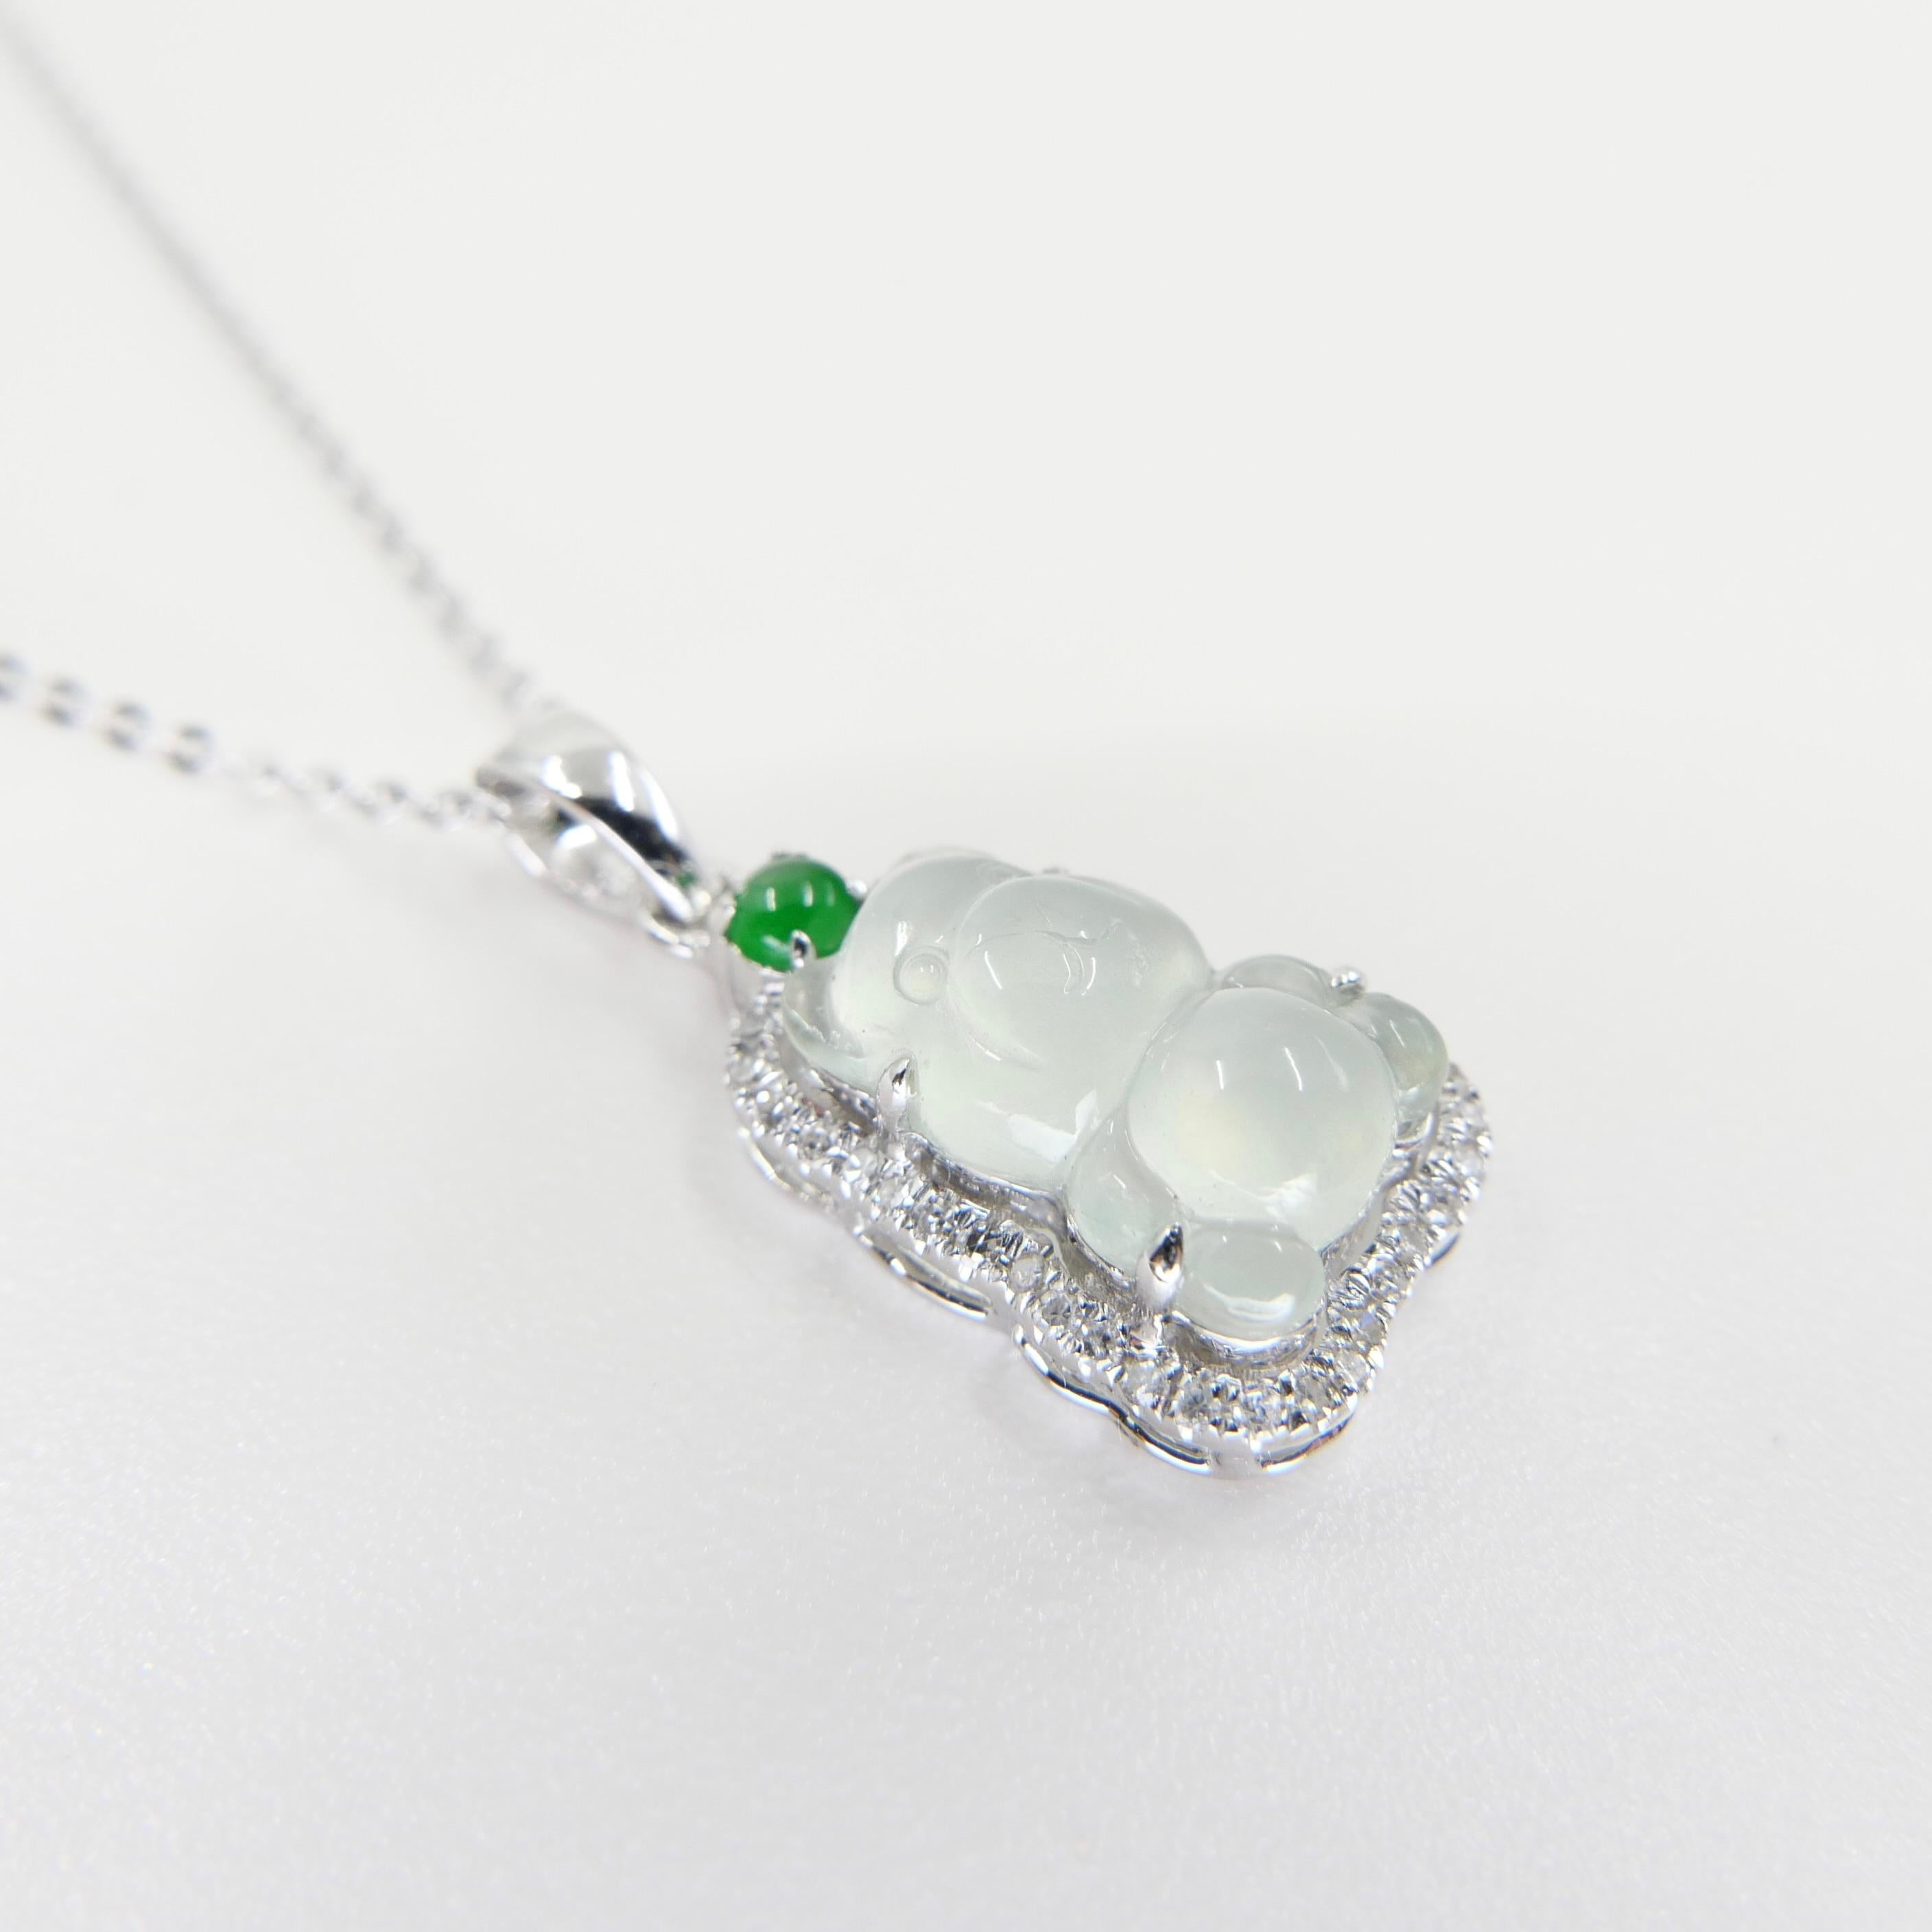 Certified Imperial & Icy Jade Diamond Gummy Bear Pendant, Cuteness Overload For Sale 6